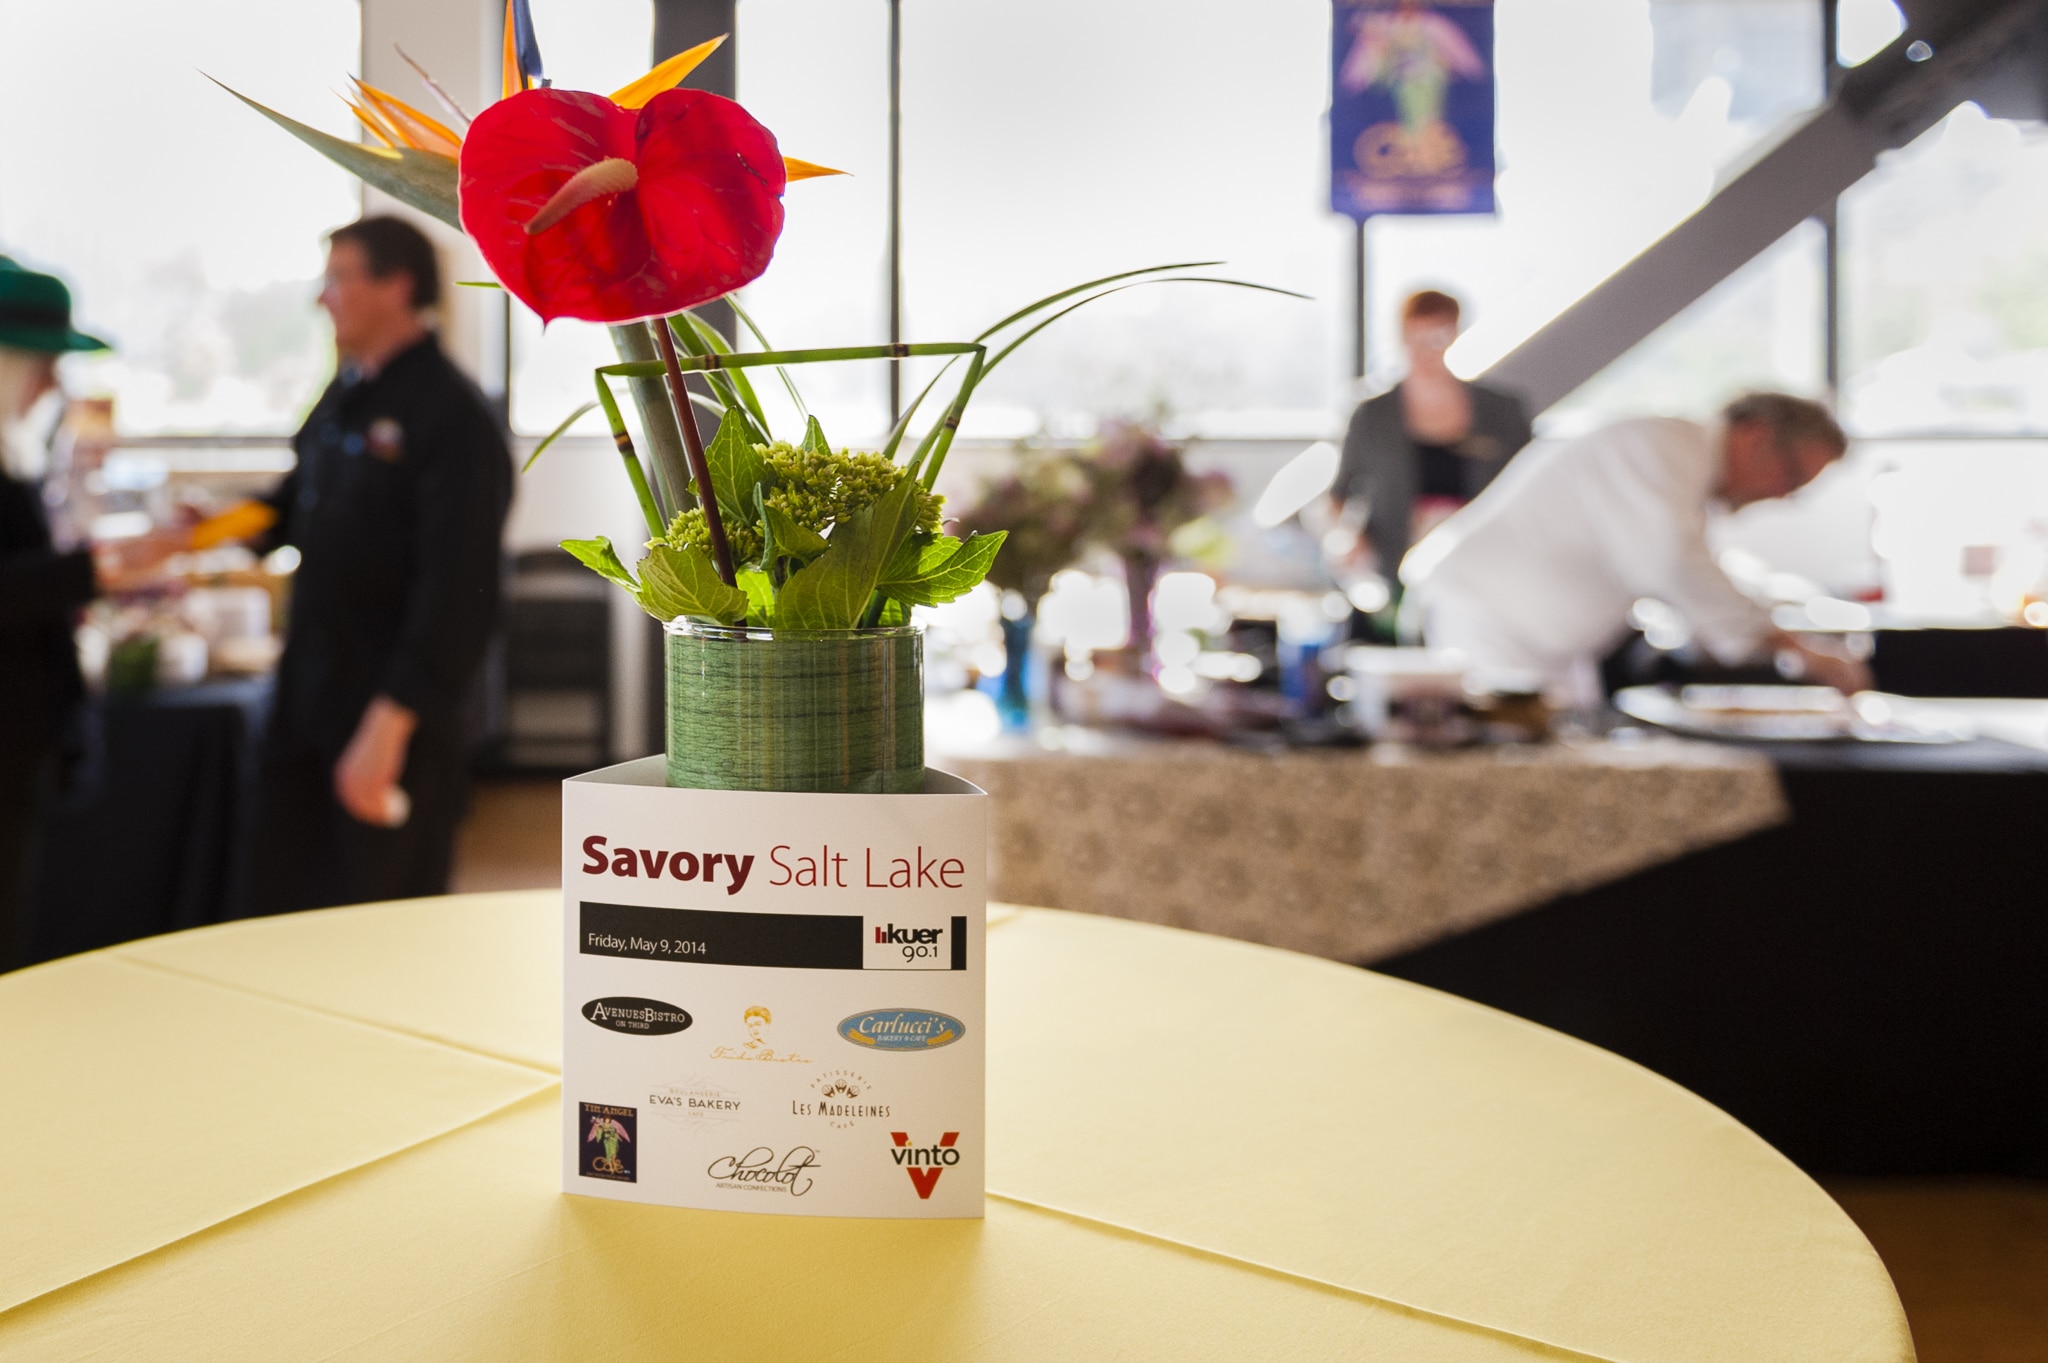 A centerpiece with a red flower at the KUER Savory Salt Lake event.